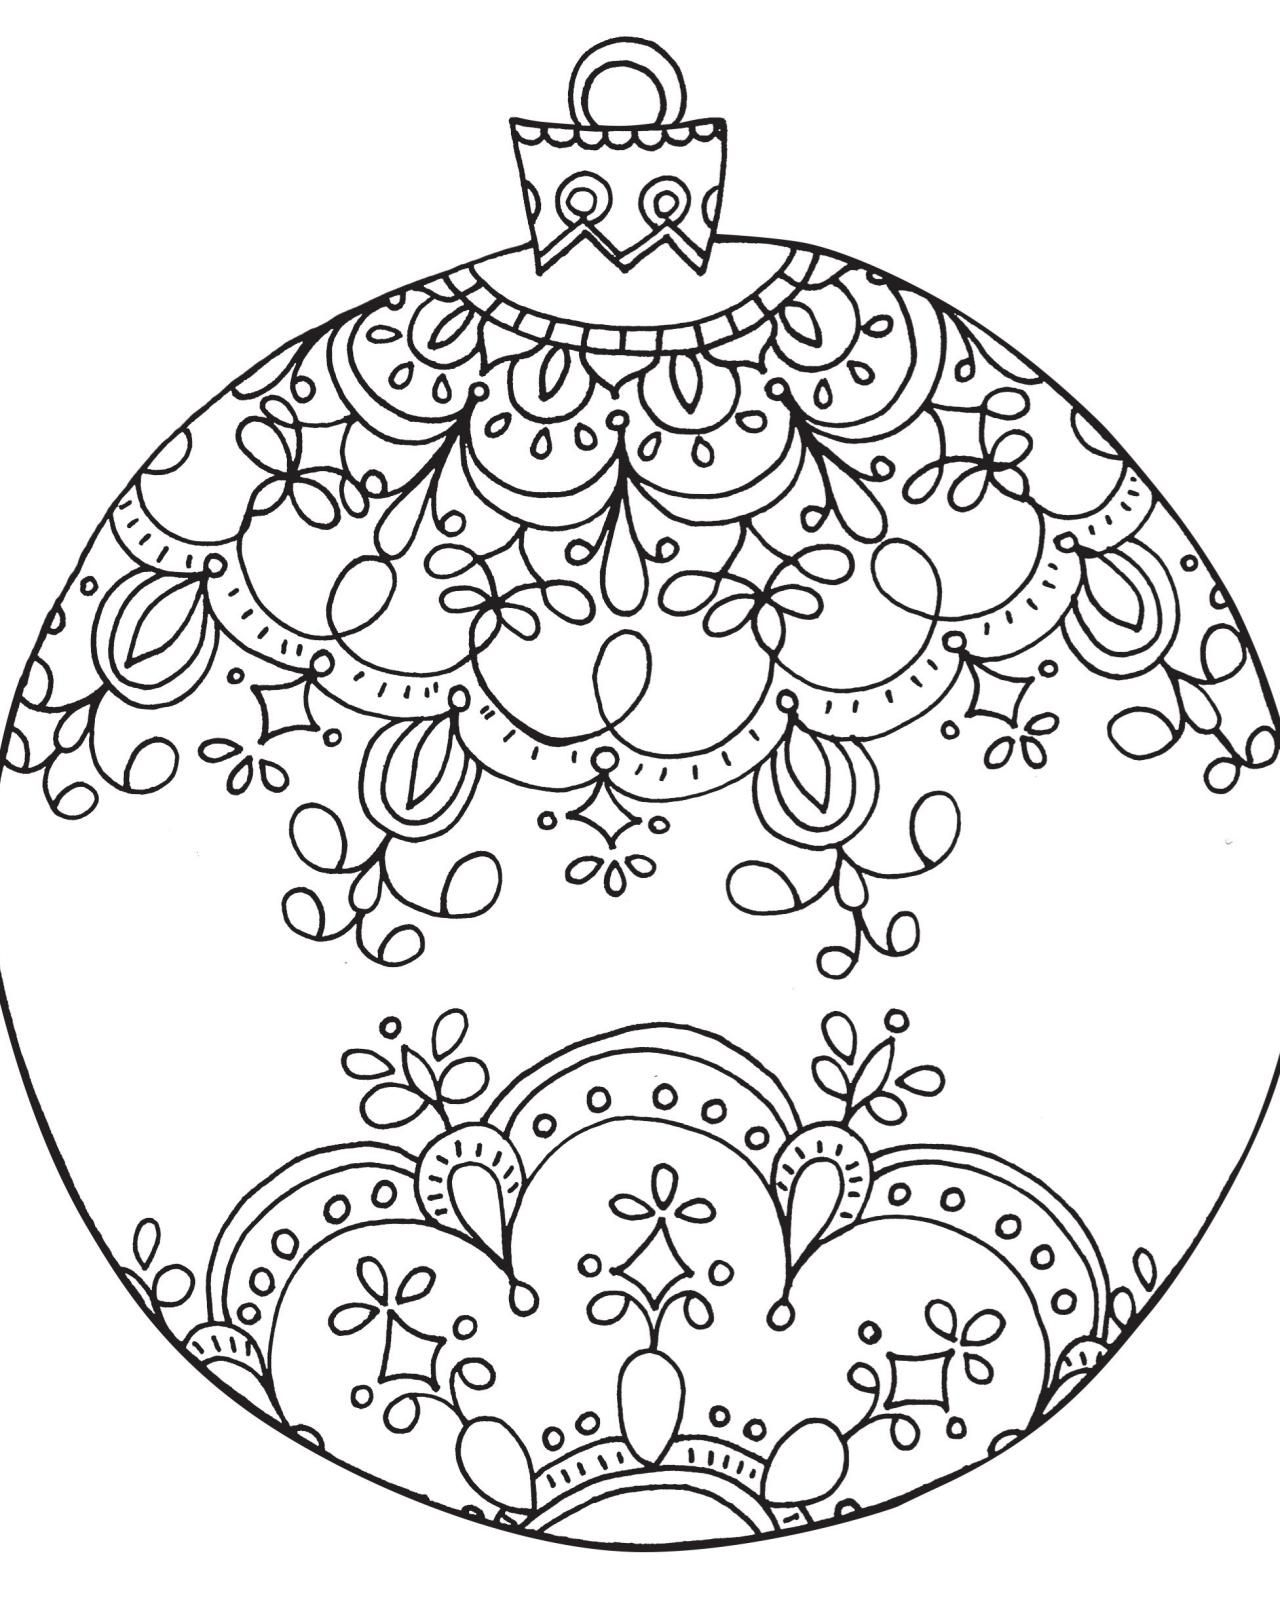 Coloring Pages Holiday Free Holiday Coloring Pages For Adults At Getdrawings Free For